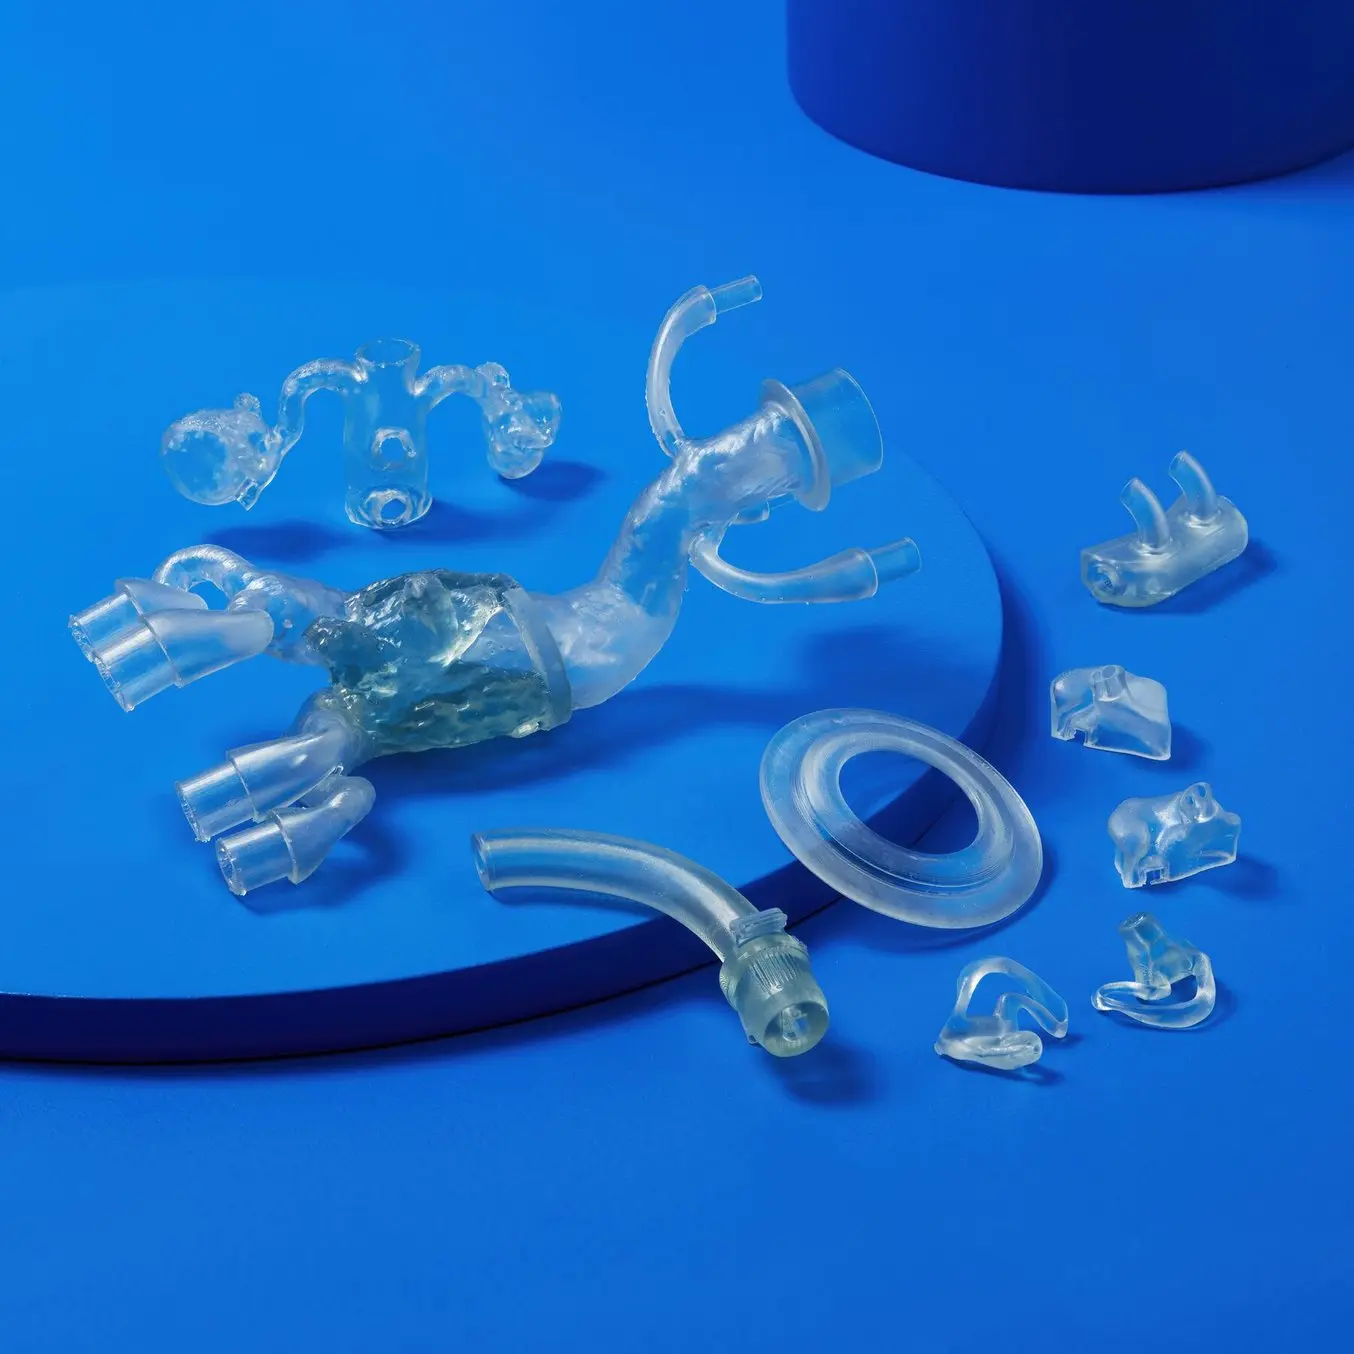 3D printed parts in BioMed Flexible, a clear resin, on a blue background